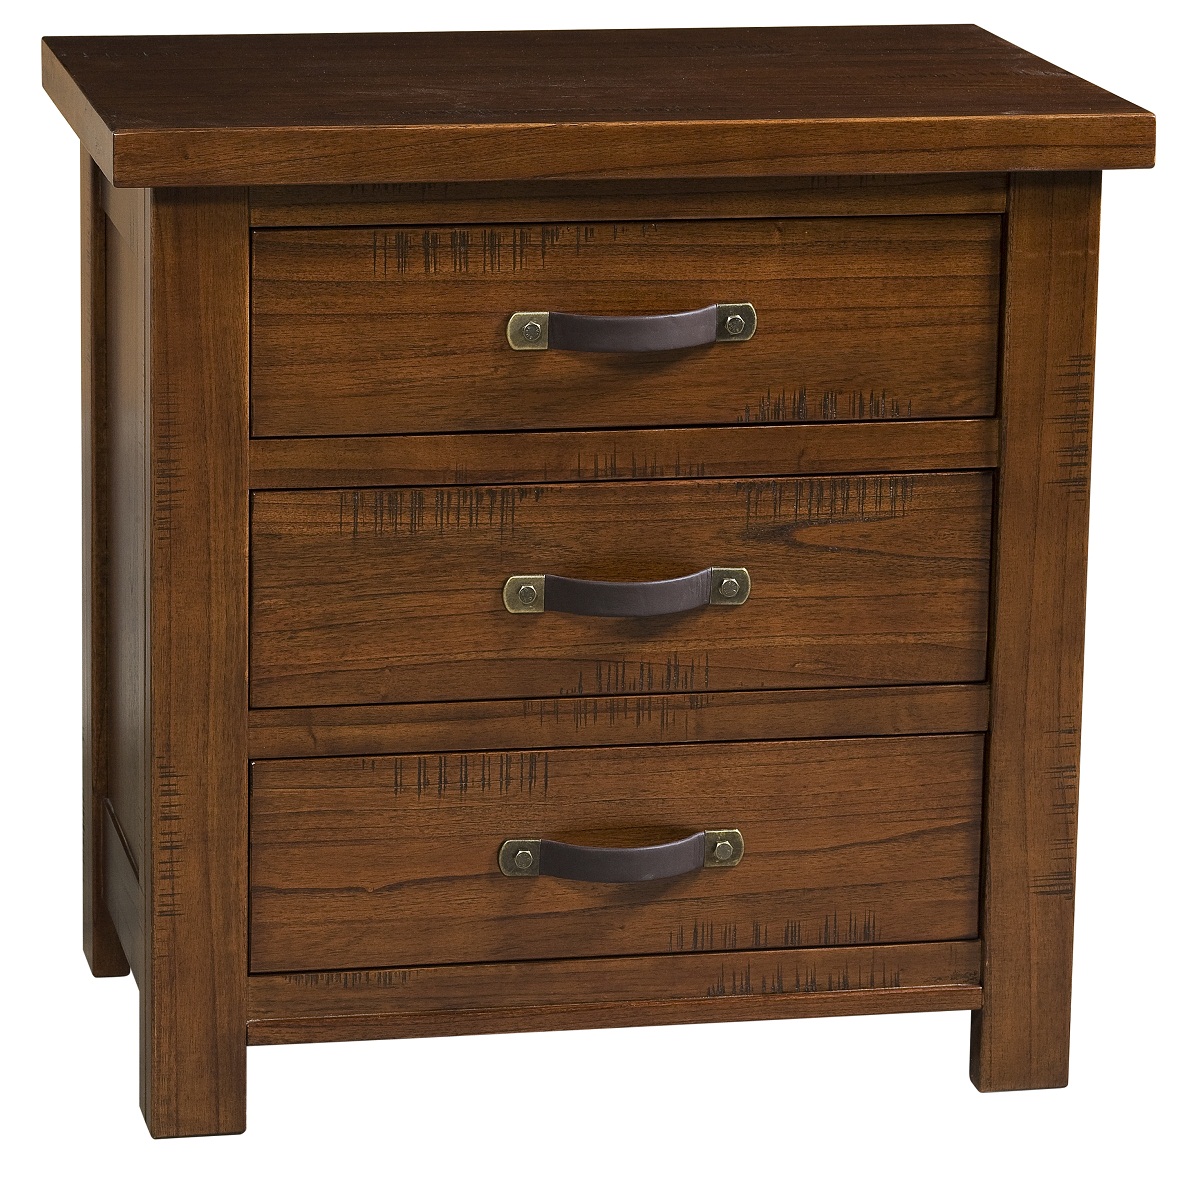 Hillsdale Outback Nightstand - Distressed Chestnut